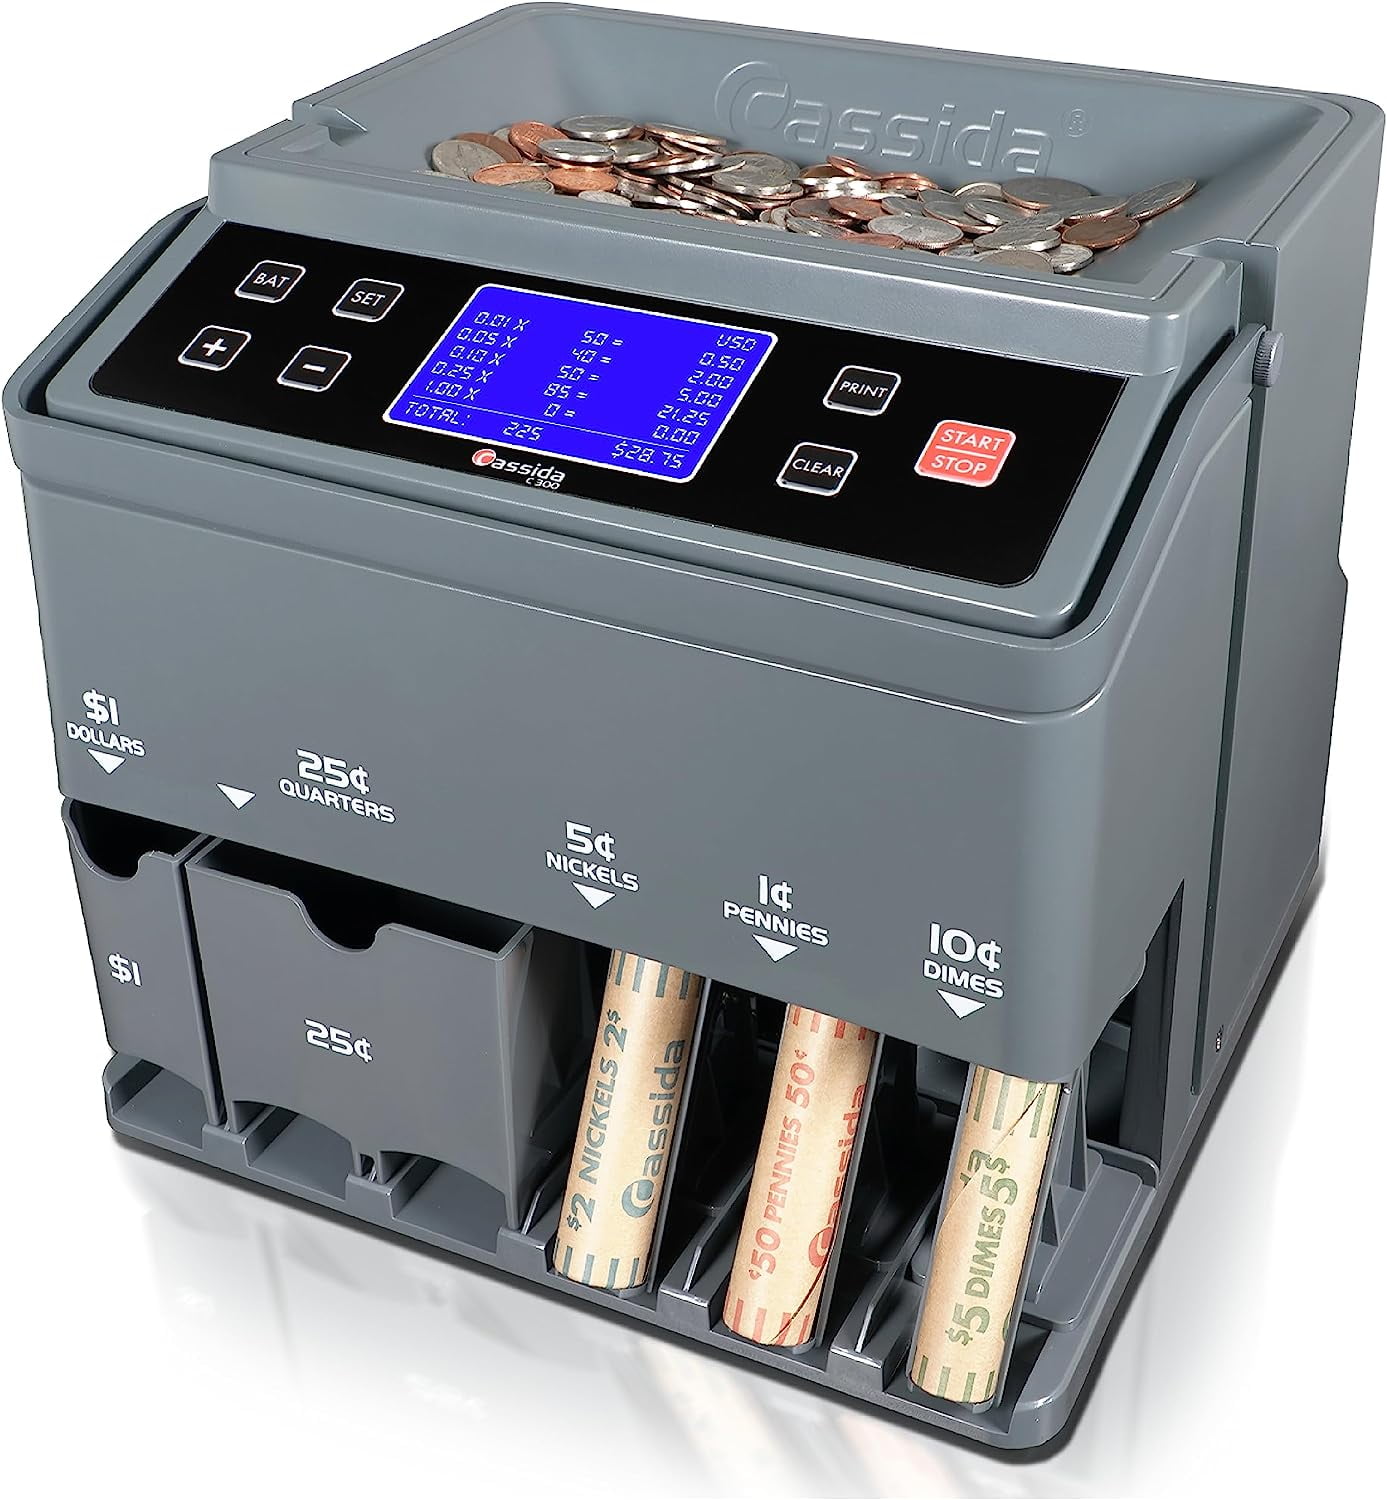 Automatic Coin Sorting Machine, Brandt Coin Sorter Counter